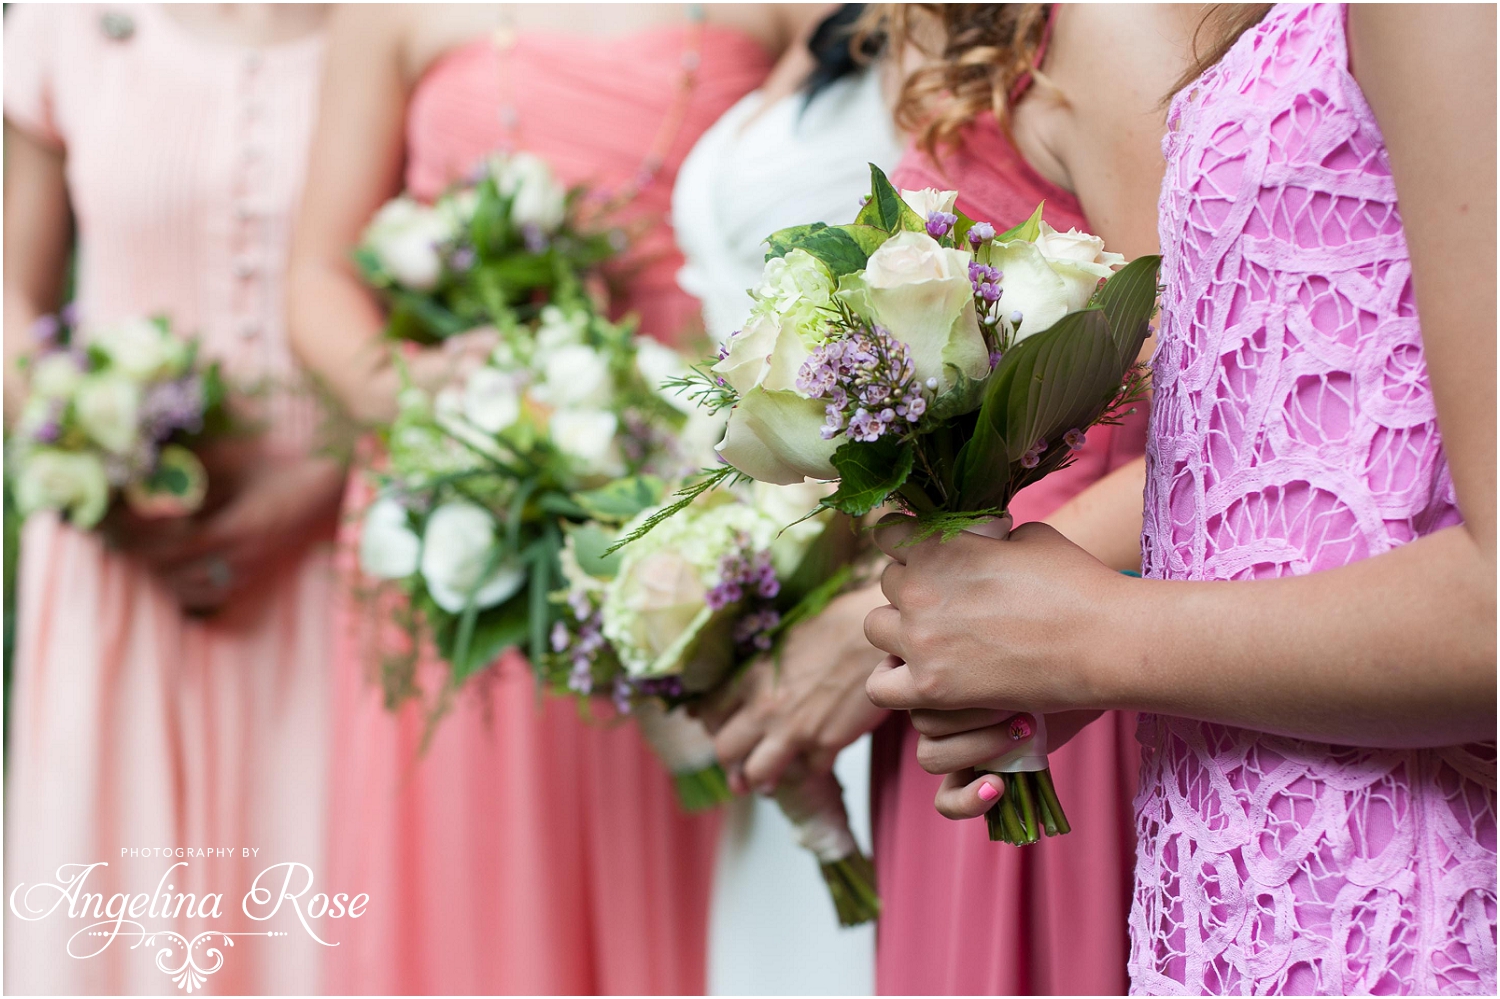 Danielle & James: A Country Wedding - Angelina Rose Photography, Boston ...